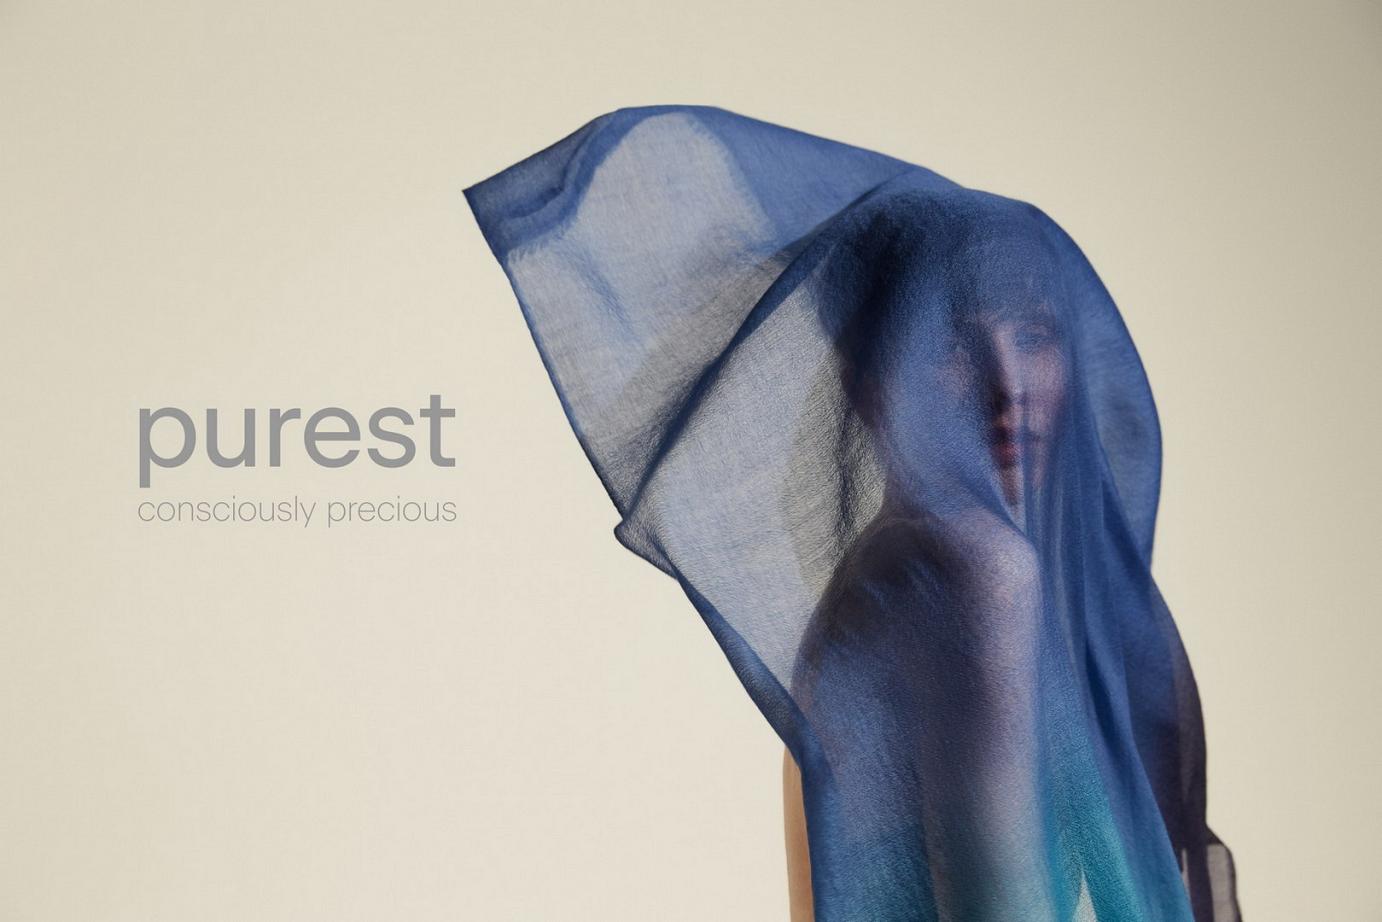 CoqCreative power by ProductionLink s.r.l. Purest-Cashmere Purest-Cashmere  Purest-Cashmere